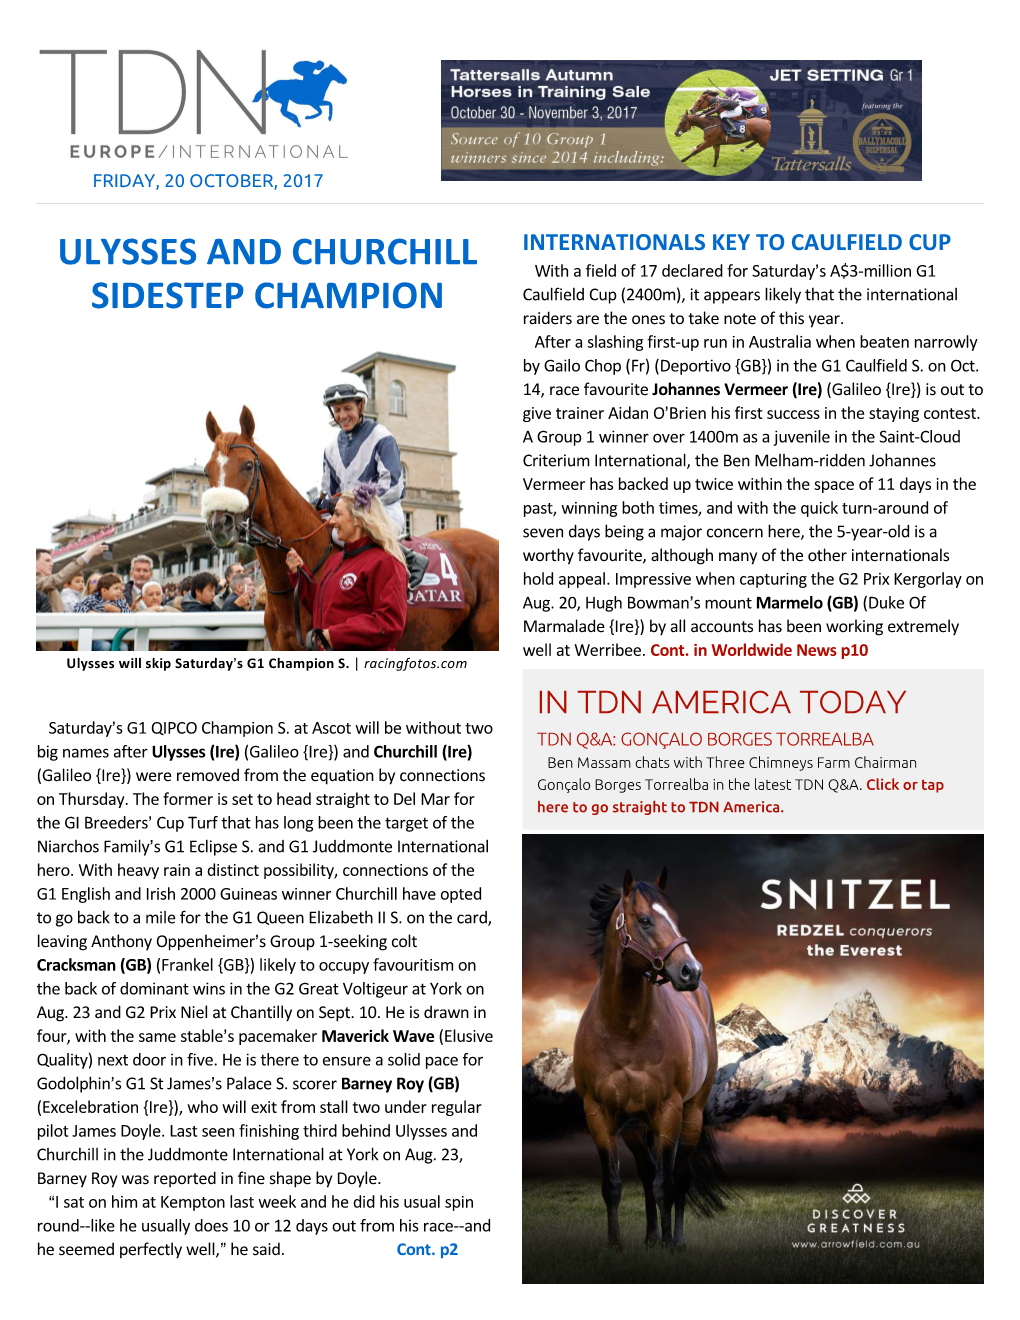 Ulysses and Churchill Sidestep Champion Cont